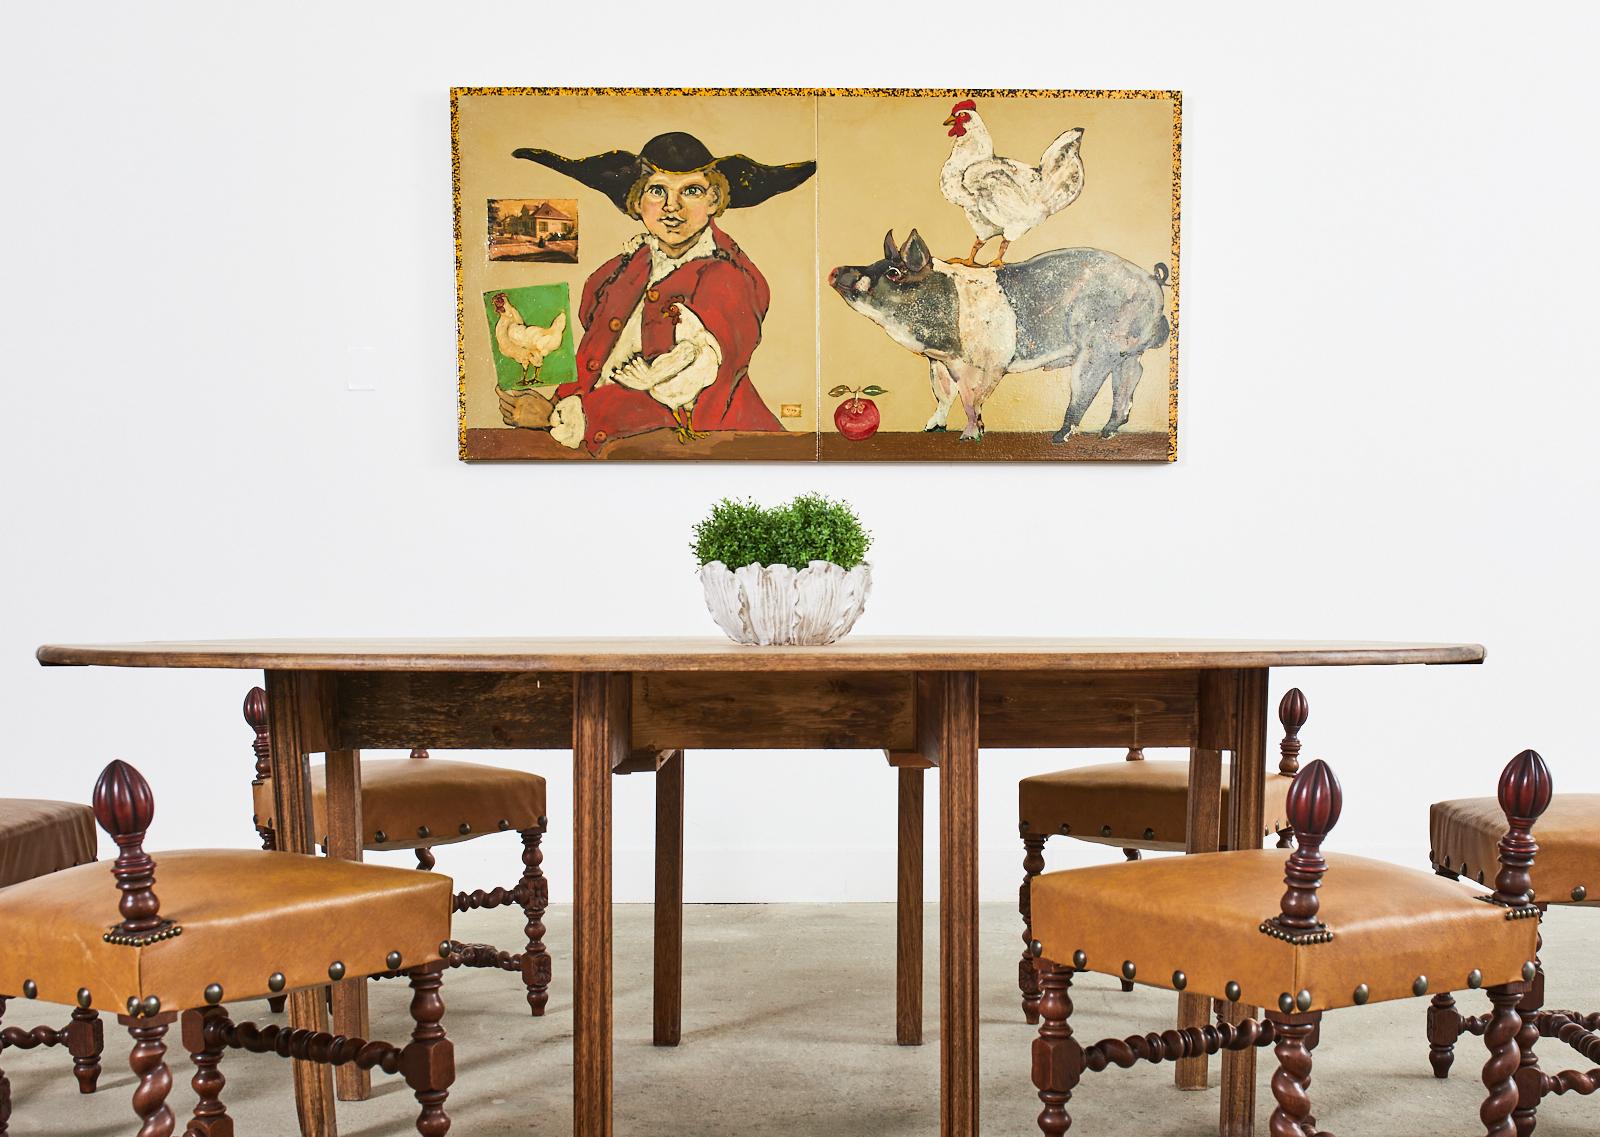 Large whimsical oil on canvas painting depicting an 18th century French provincial gentleman farmer with chickens and a pig. Late 20th century painting by Ira Yeager (American 1938-2022) made by conjoining two 36 inch canvases. Charming scene inset